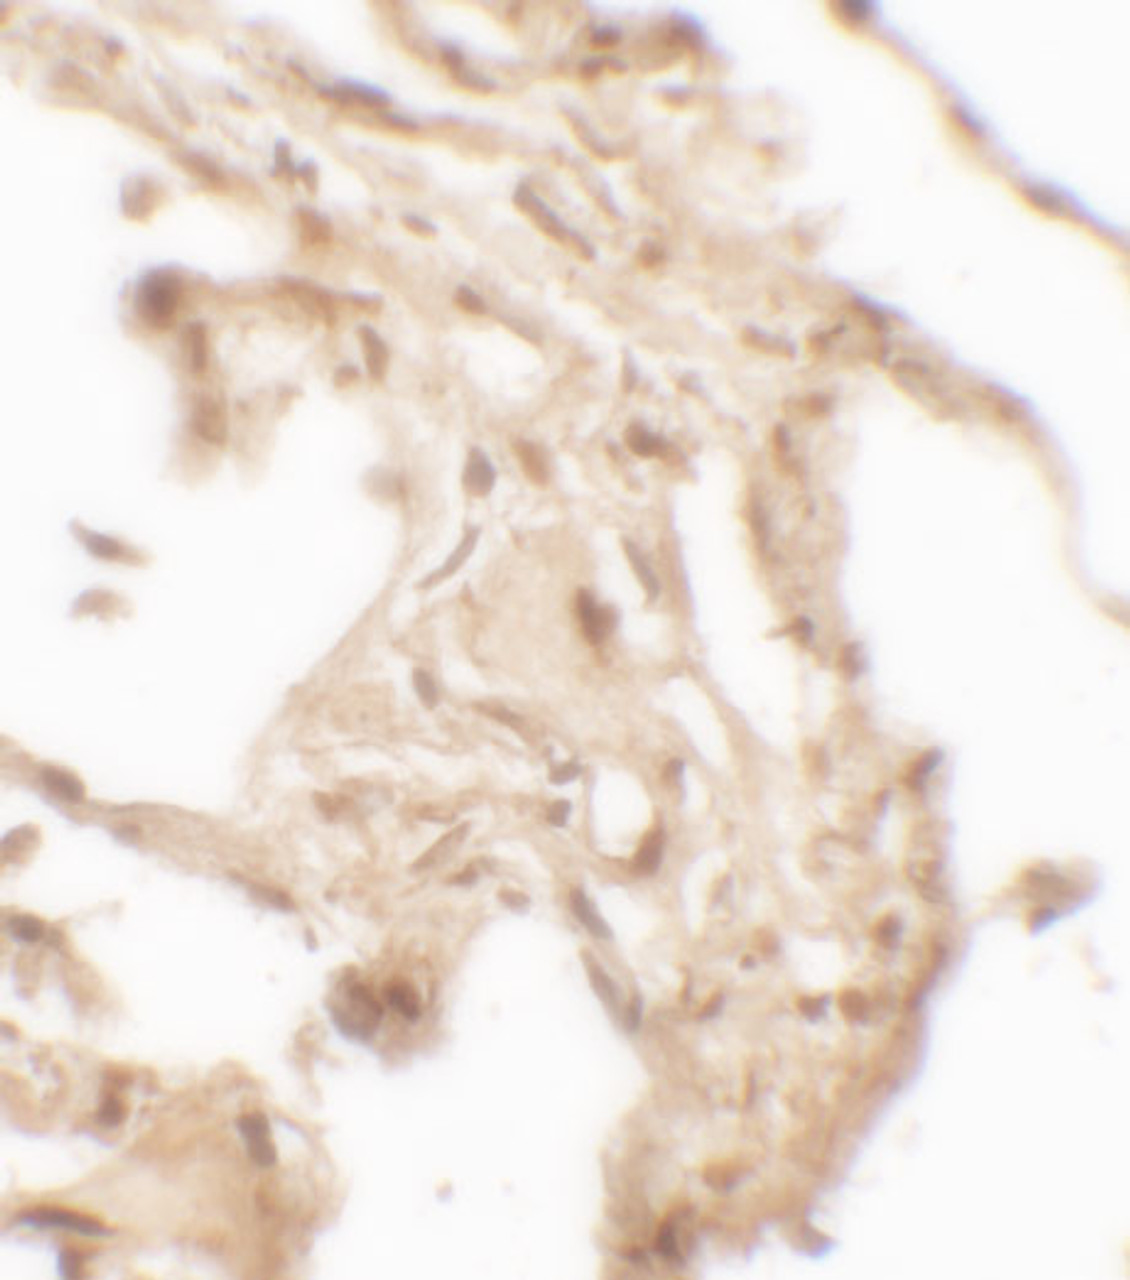 Immunohistochemistry of WFDC2 in human lung tissue with WFDC2 antibody at 2.5 ug/mL.